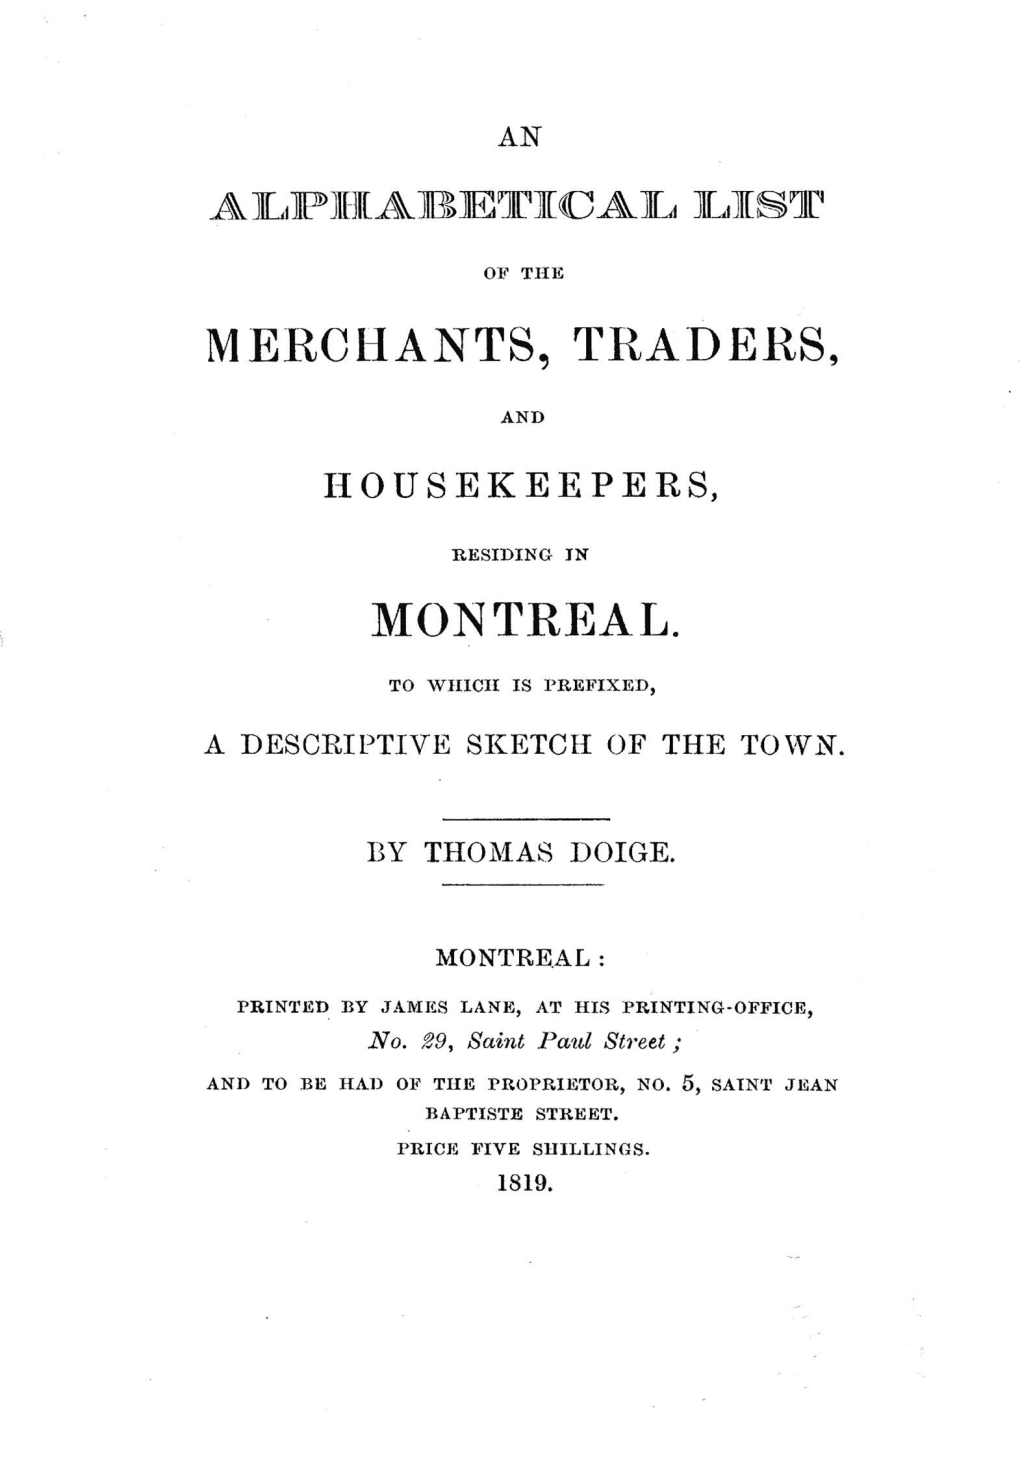 Mercl-IANTS, TRADERS, MONTREAL